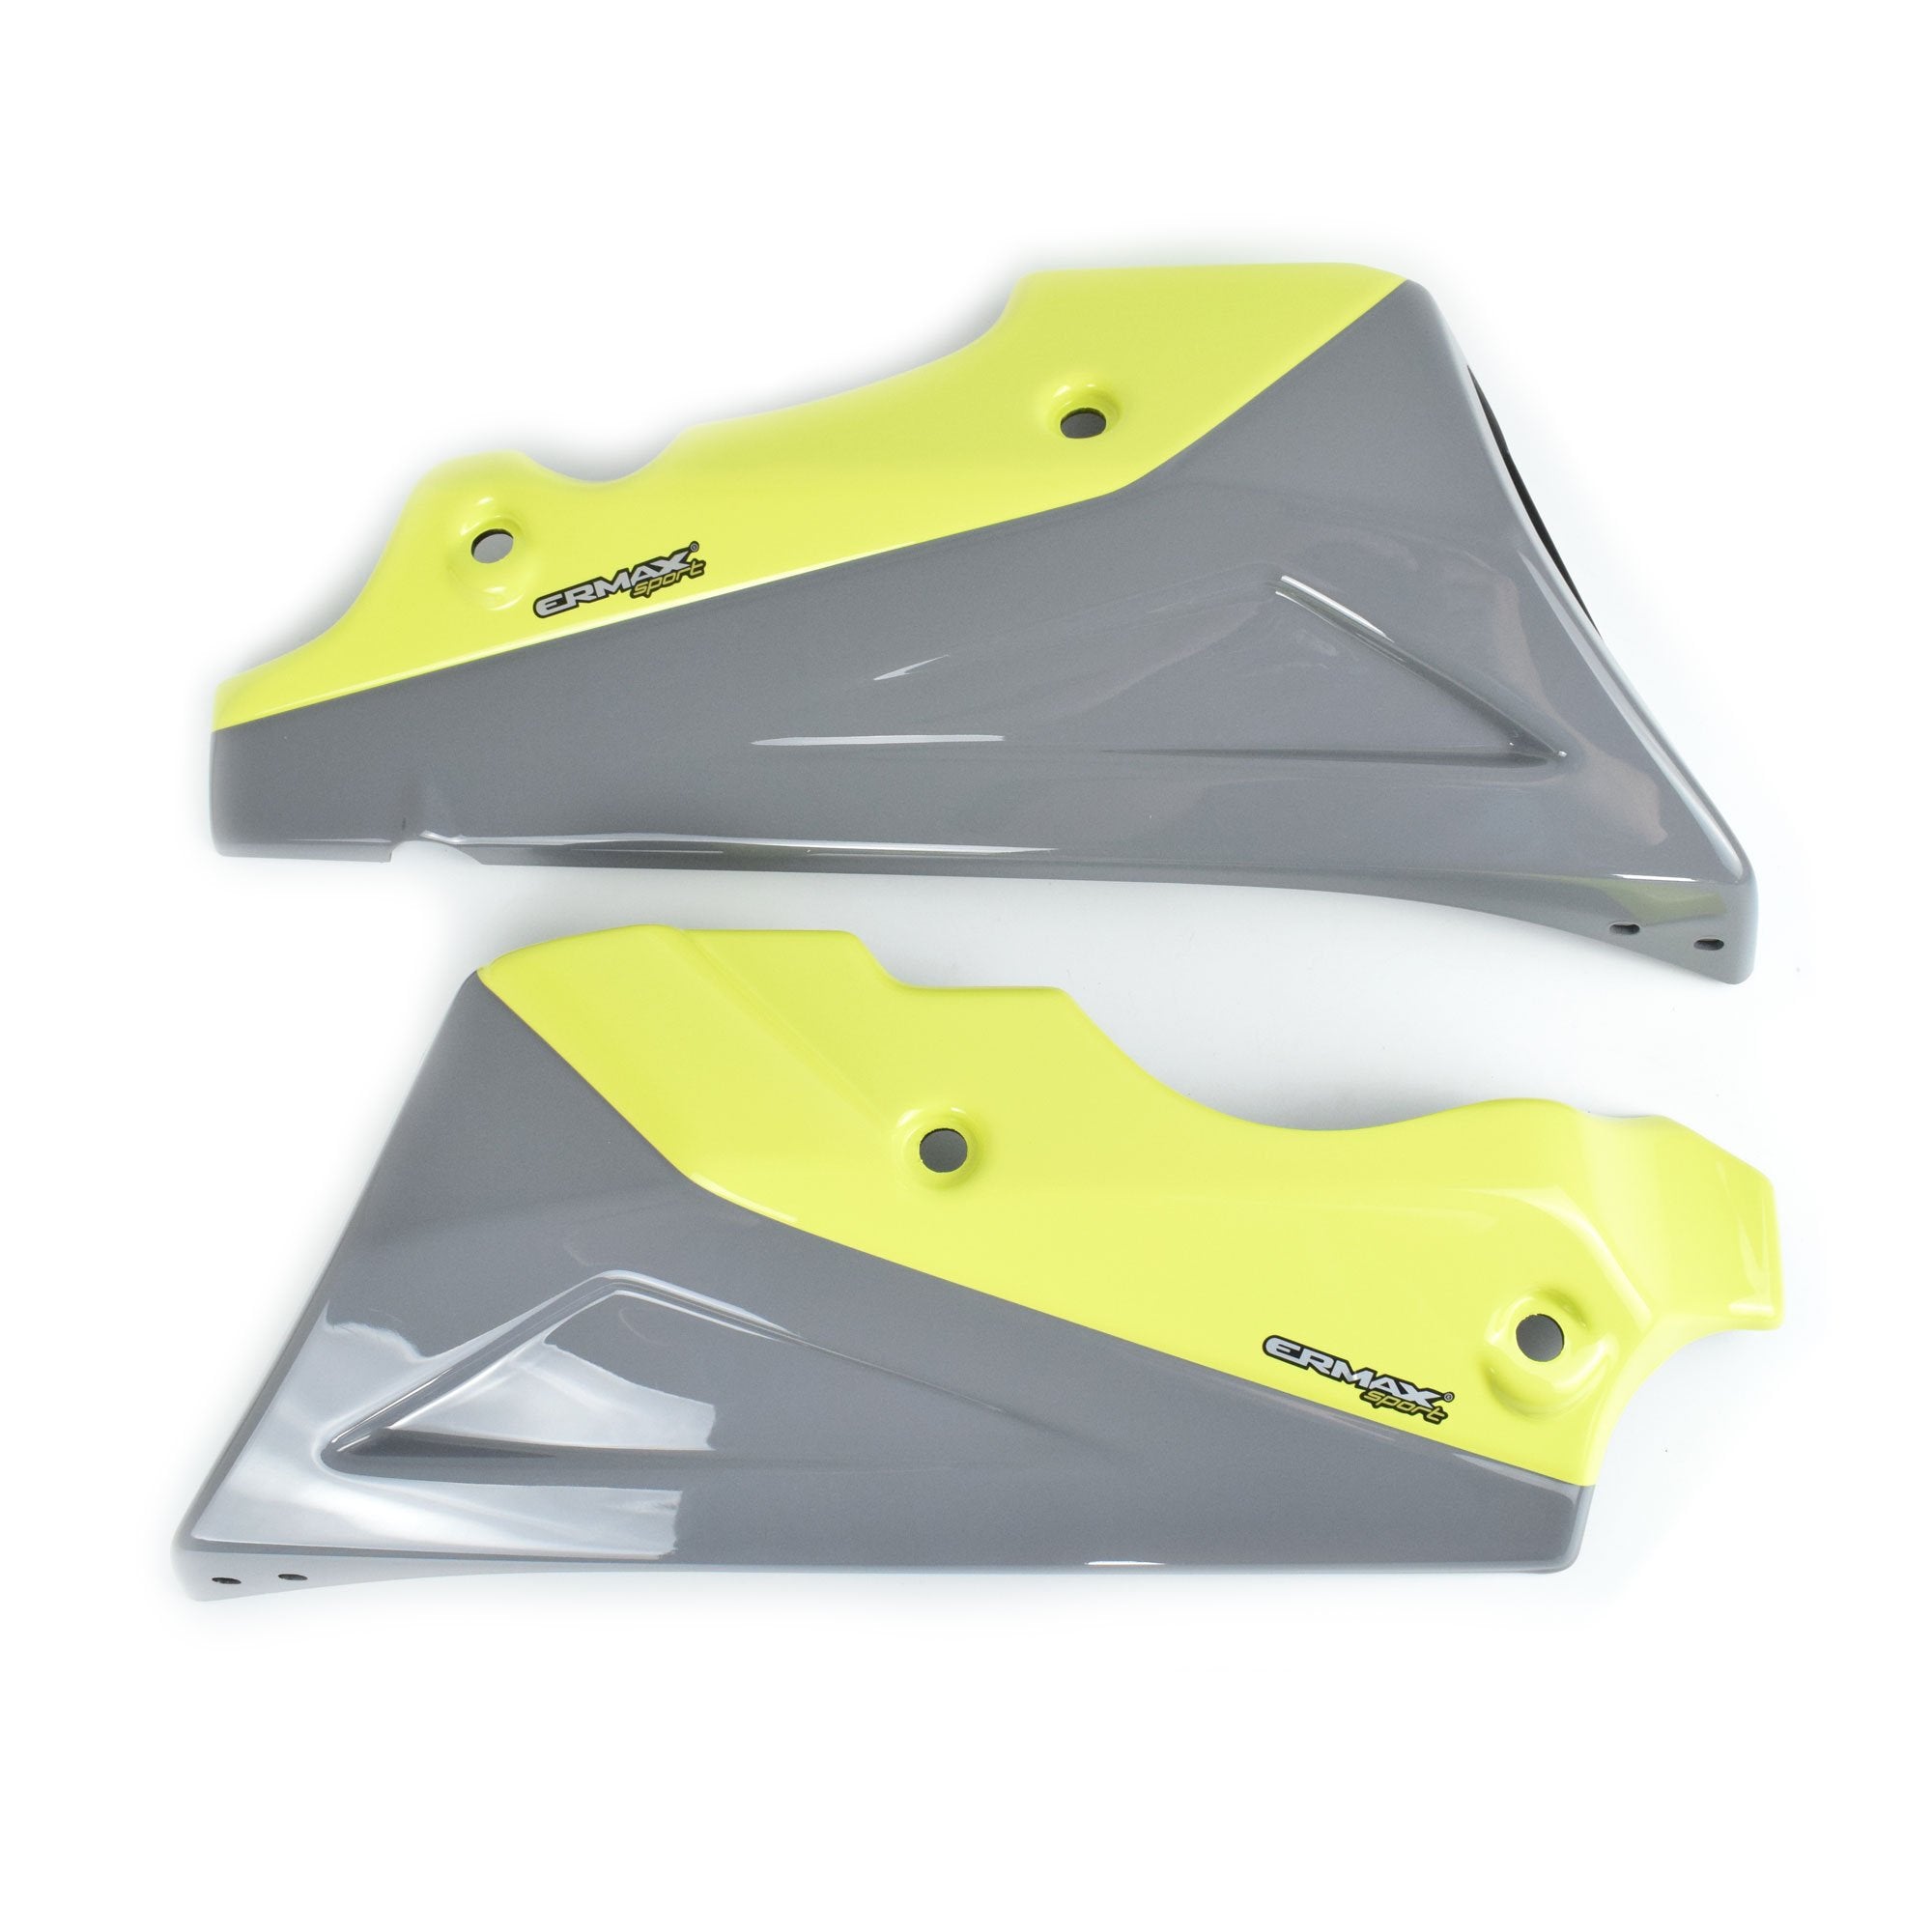 Ermax Belly Pan | Gloss Grey/Gloss Yellow (Nimbus Grey/Night Fluo Yellow) | Yamaha MT-09 2017>2018-E8902Y22-Y2-Belly Pans-Pyramid Motorcycle Accessories